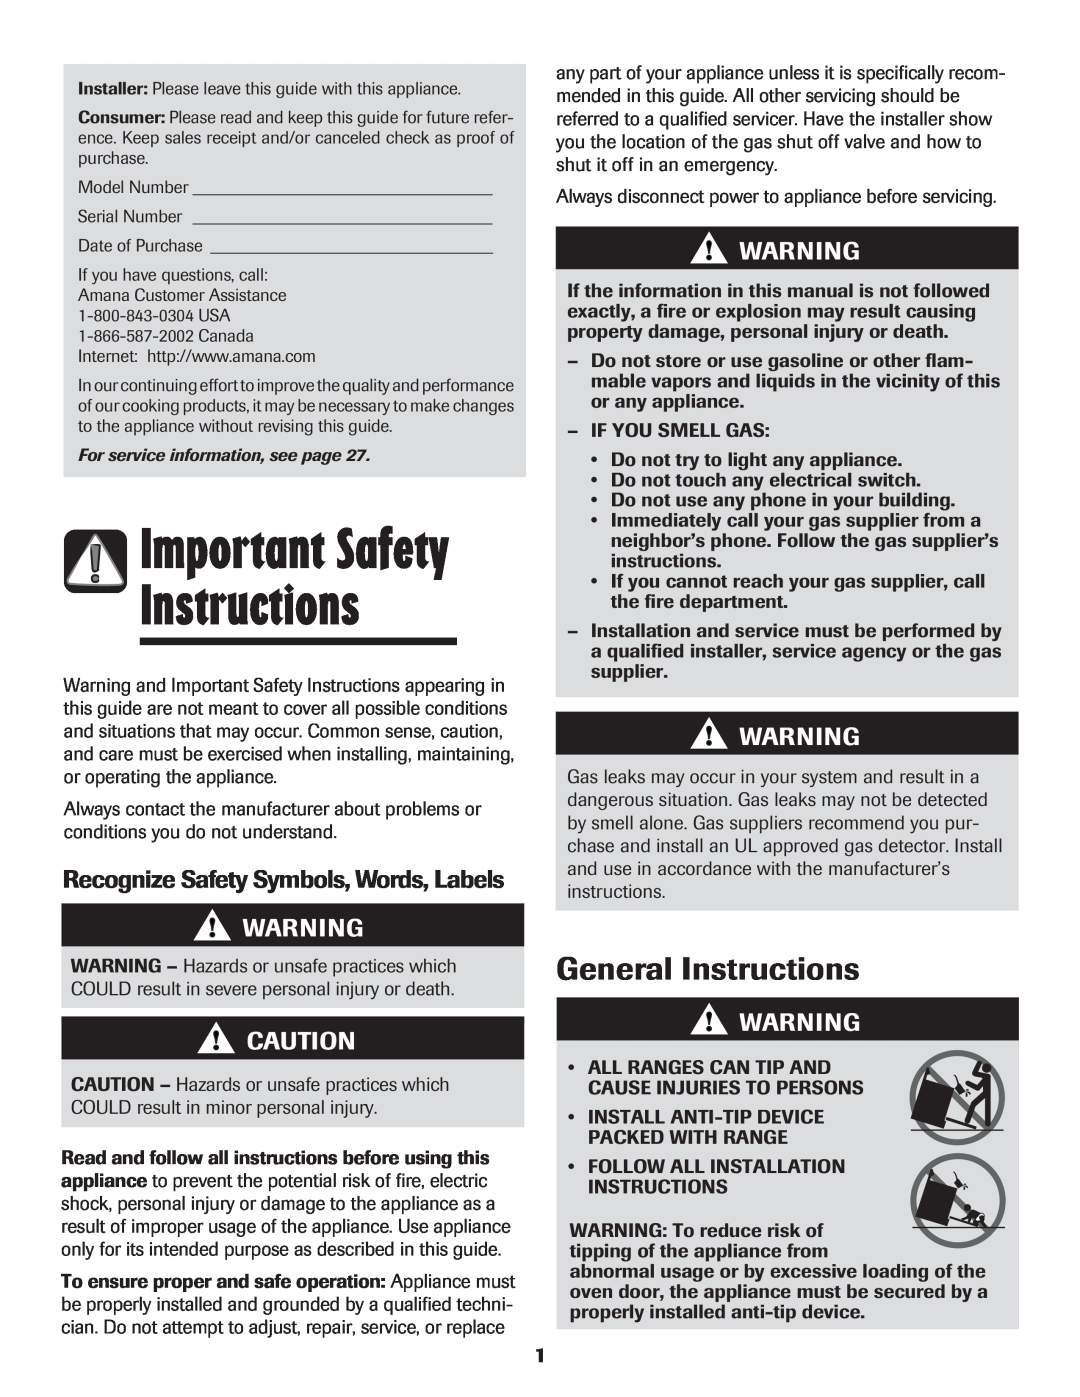 Amana 8113P515-60 manual Important Safety, General Instructions, Recognize Safety Symbols, Words, Labels 